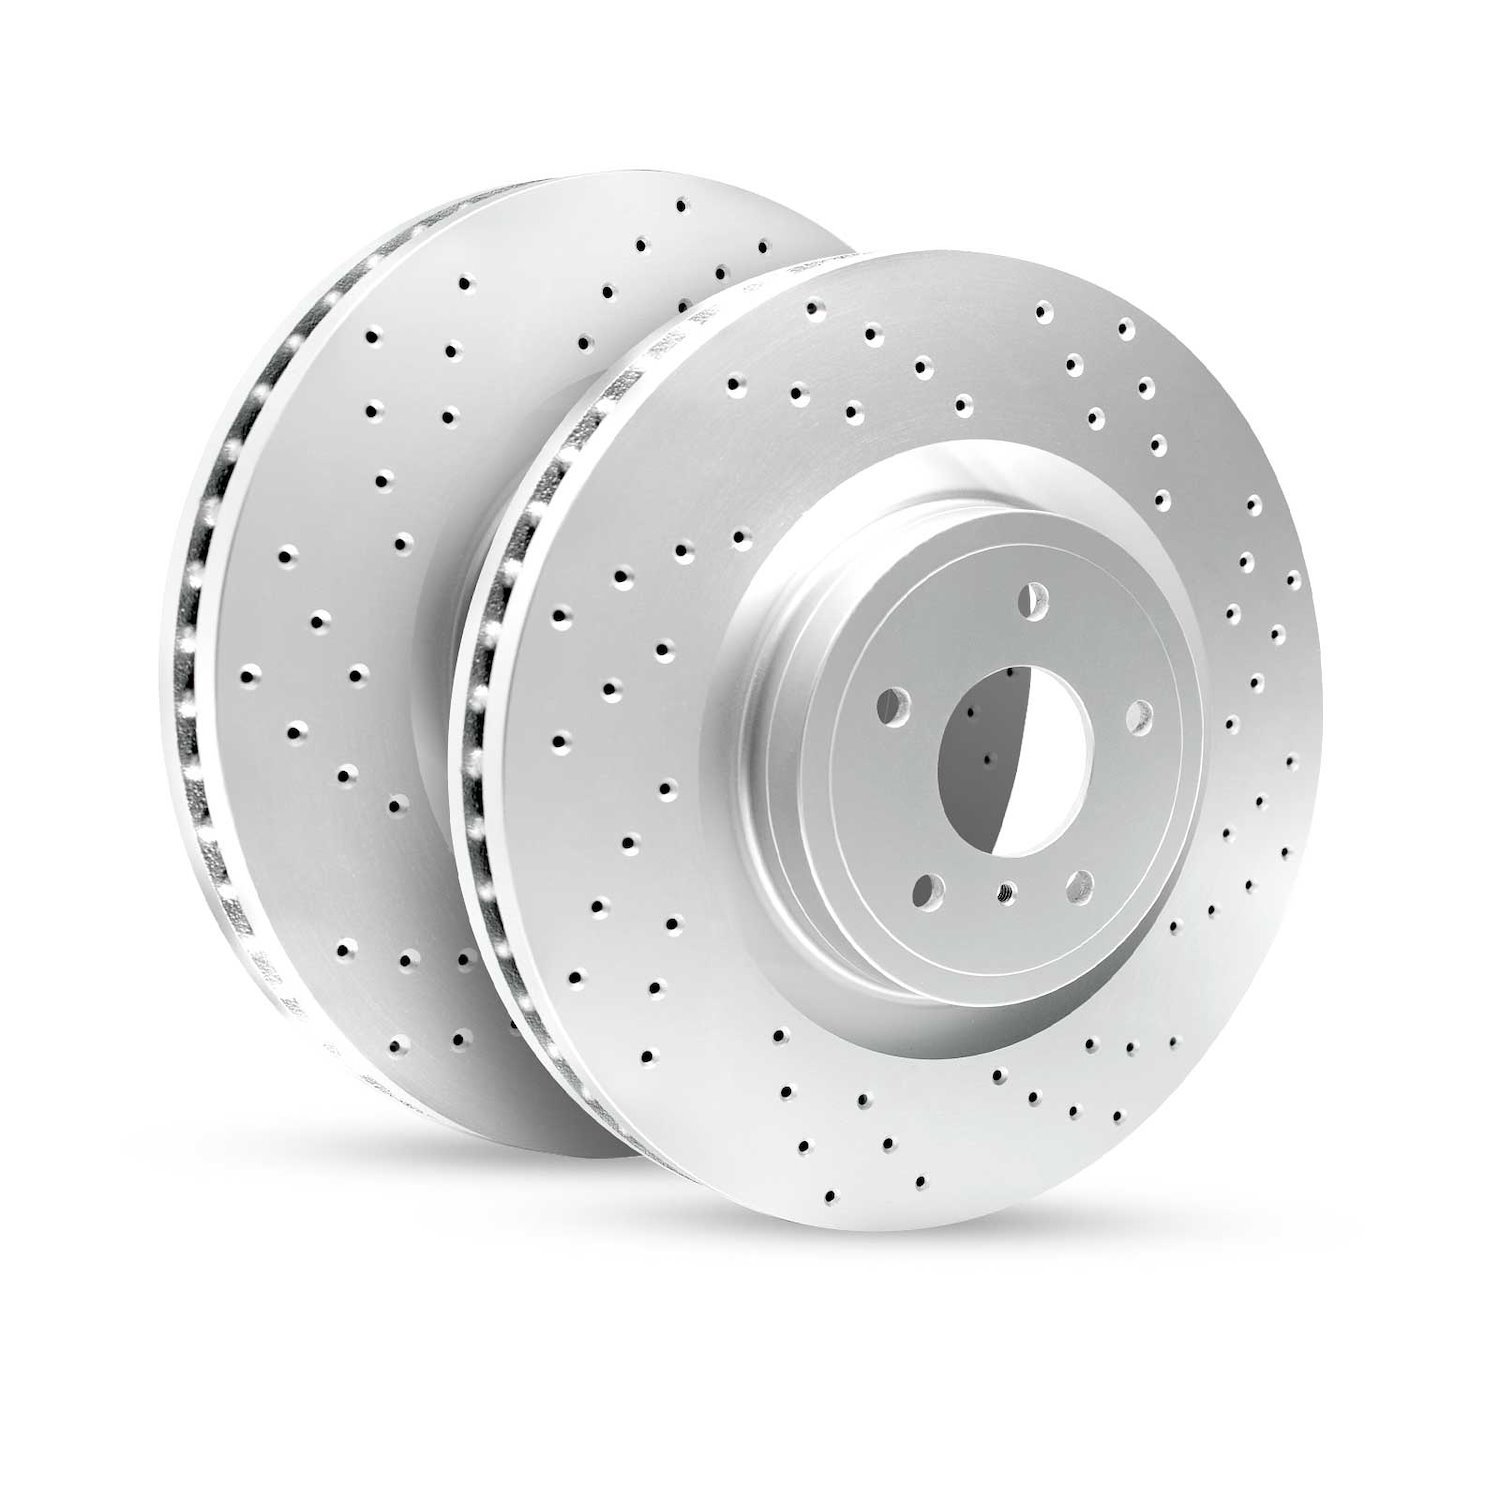 GEO-Carbon Drilled/Slotted Rotors, 1996-2011 Fits Multiple